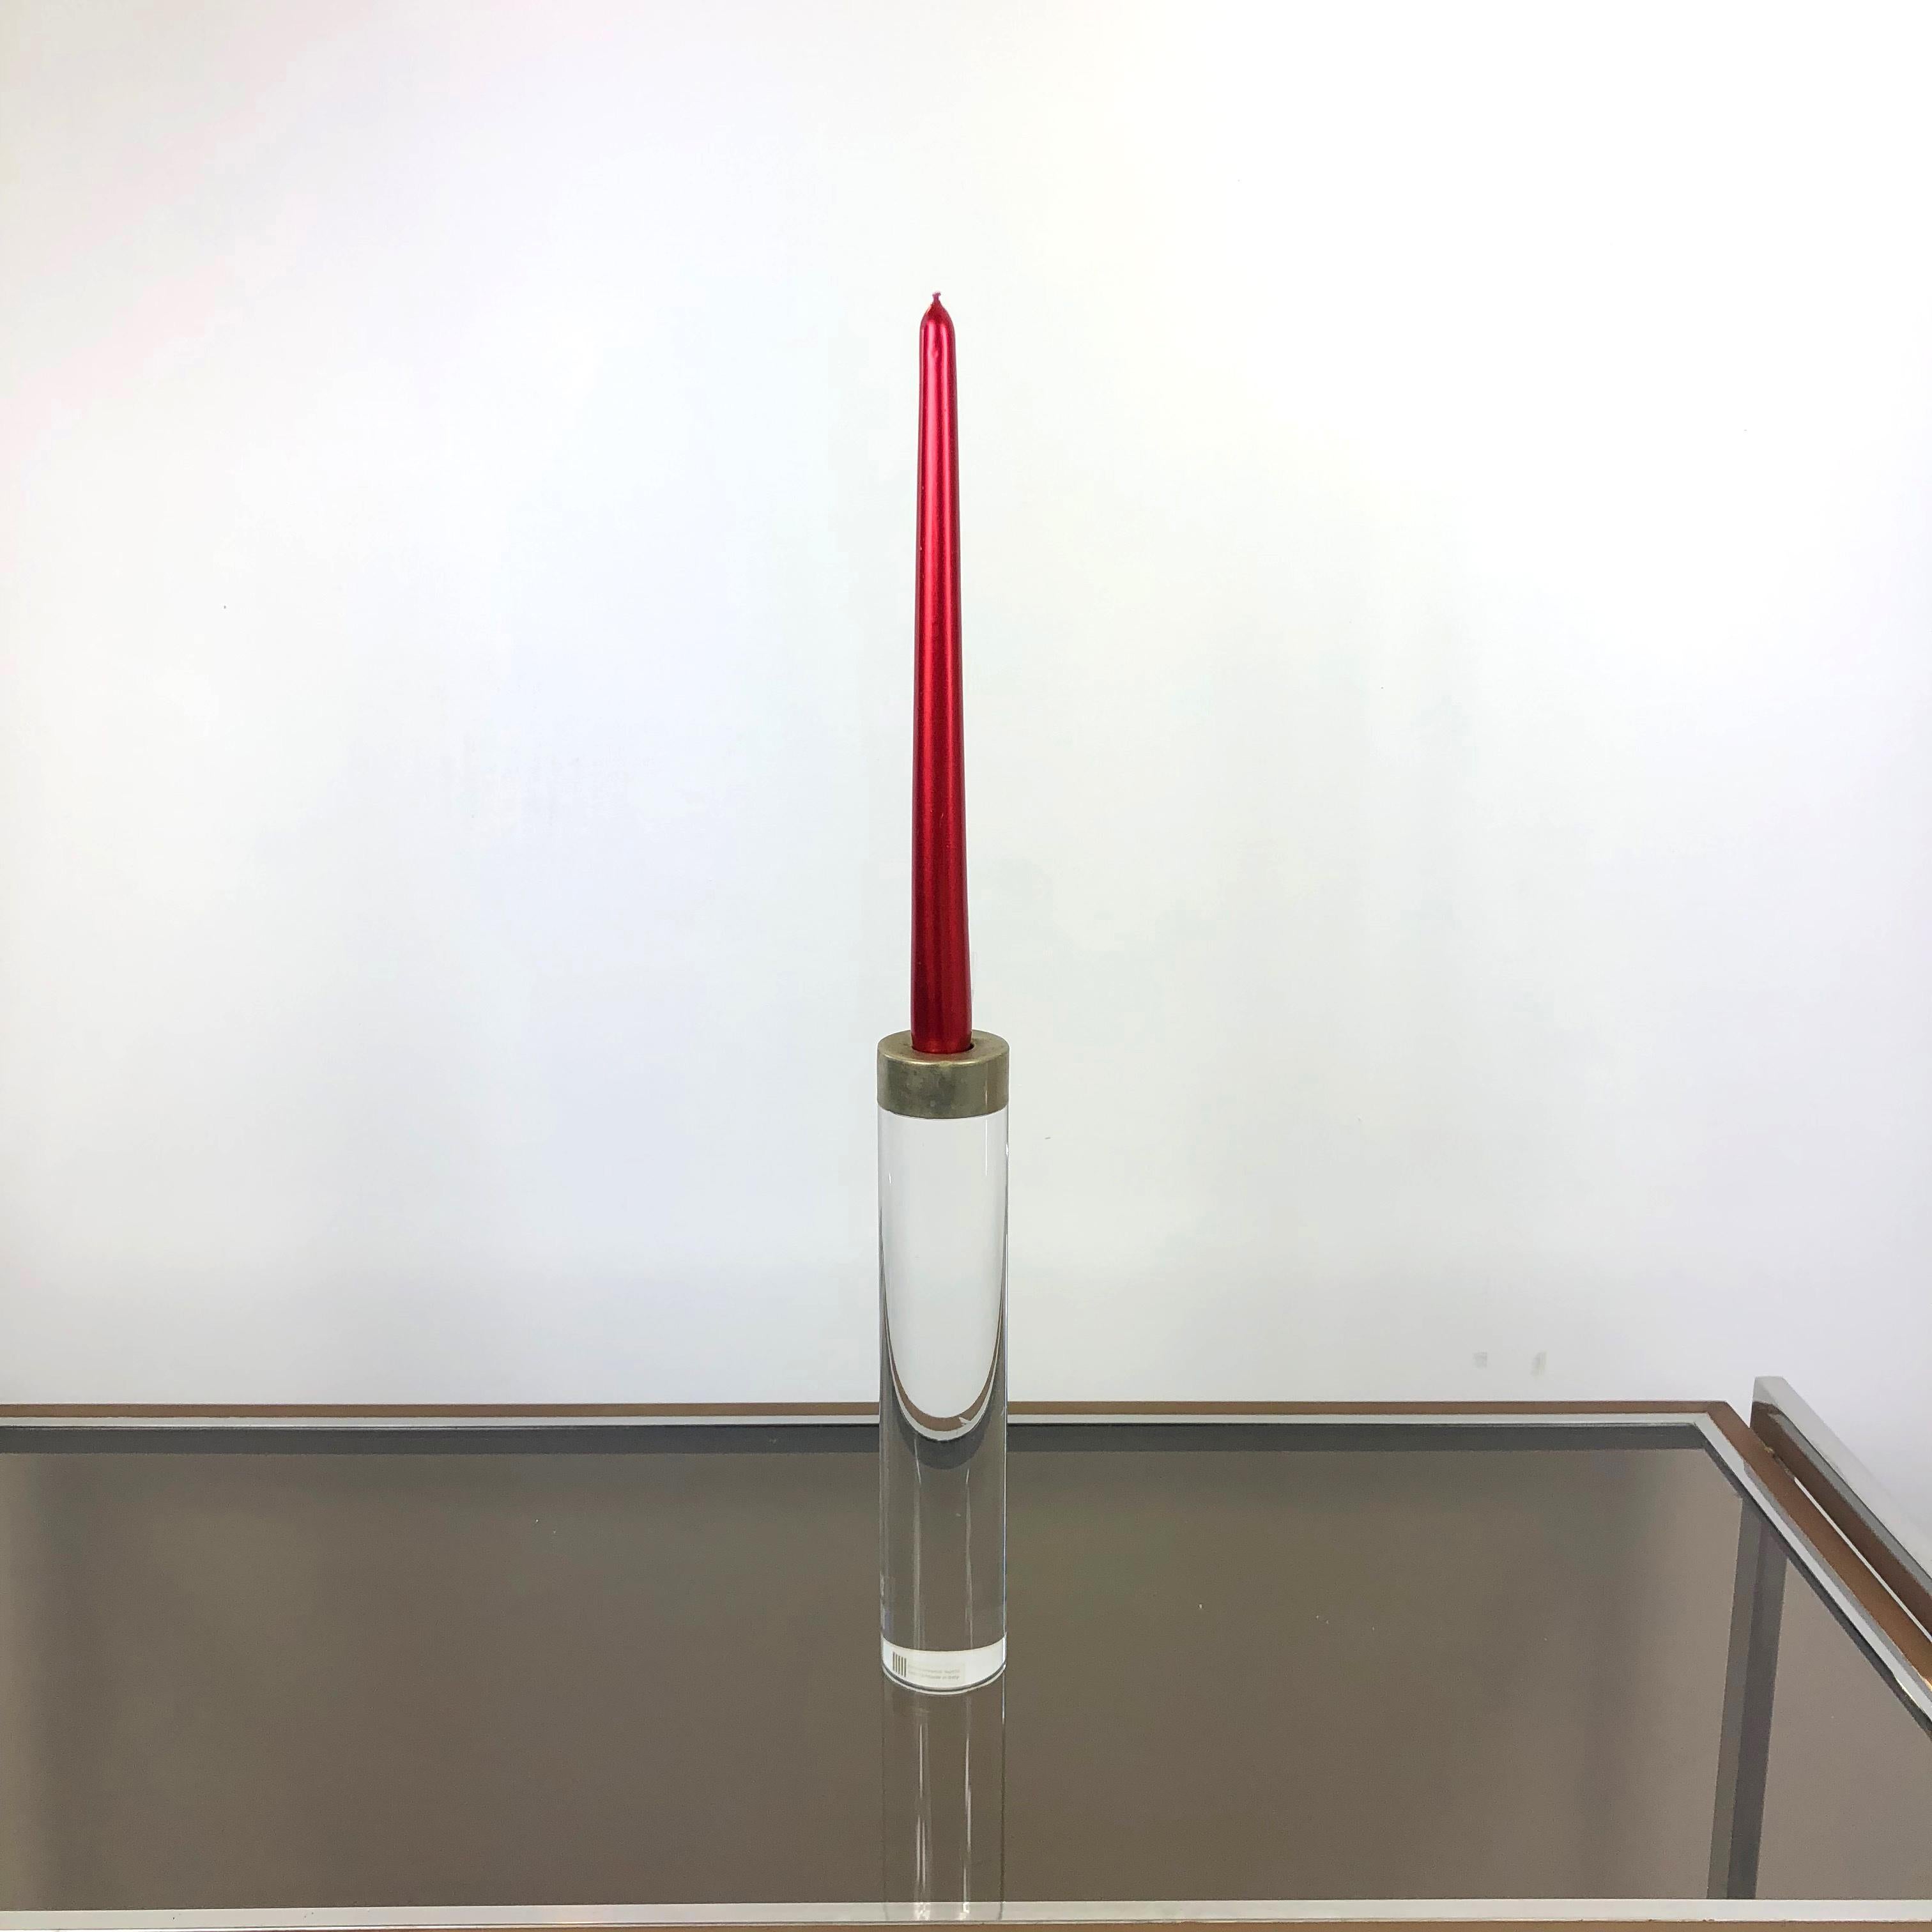 Florentine candleholder by the Italian designer F.A. Botta made in Lucite and metal, Florence, 1970s.